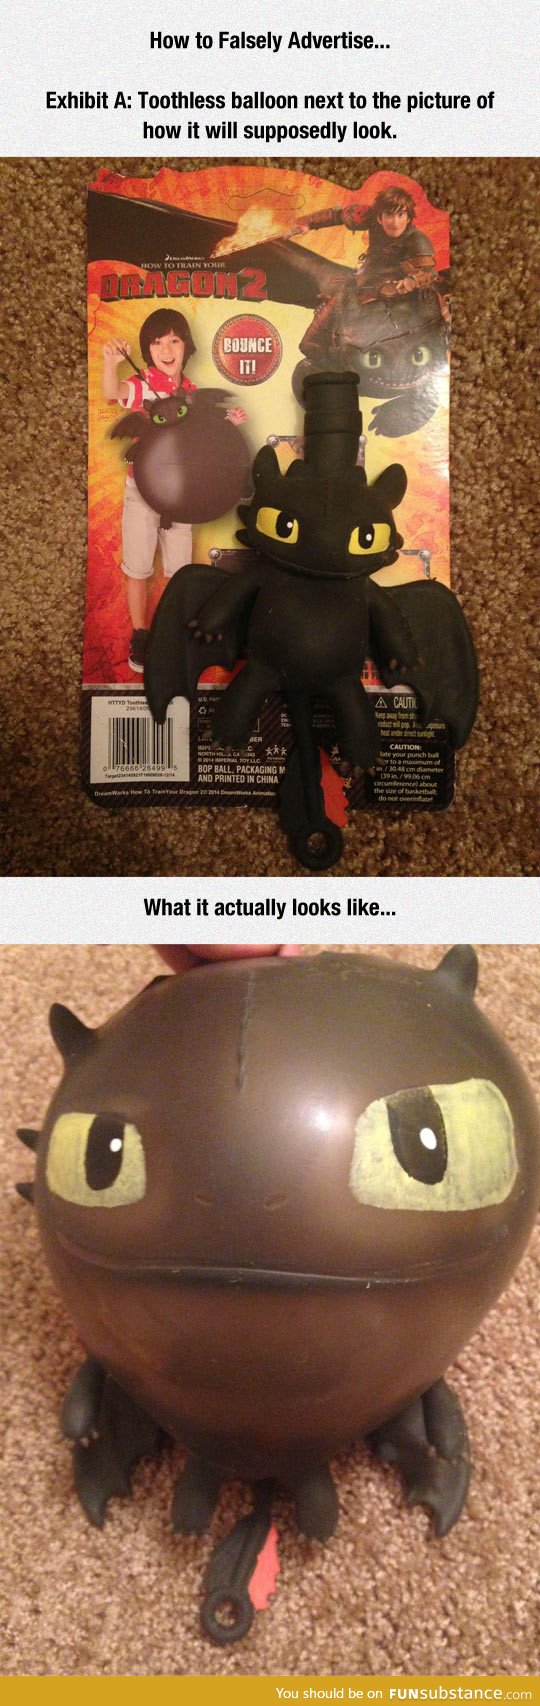 False advertising for Toothless toy